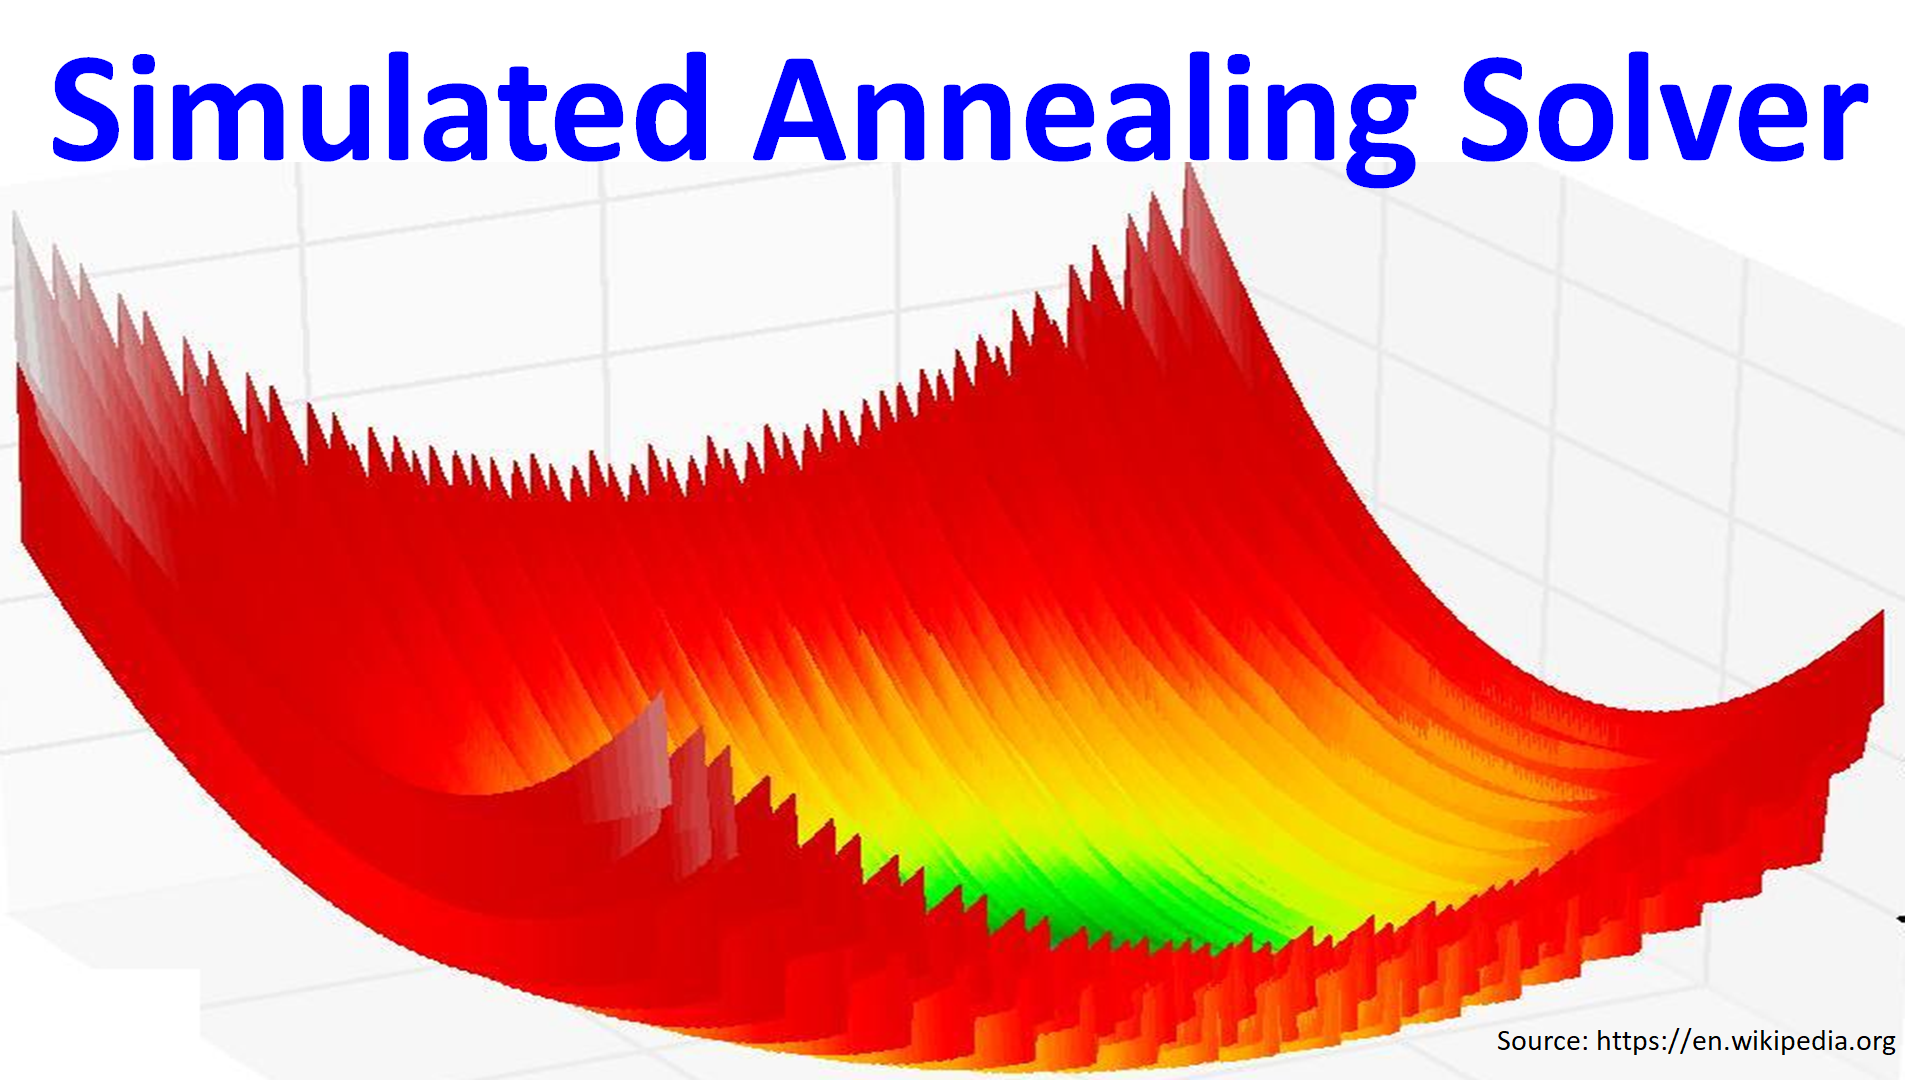 How To Use Simulated Annealing Solver To Solve Optimization Problems